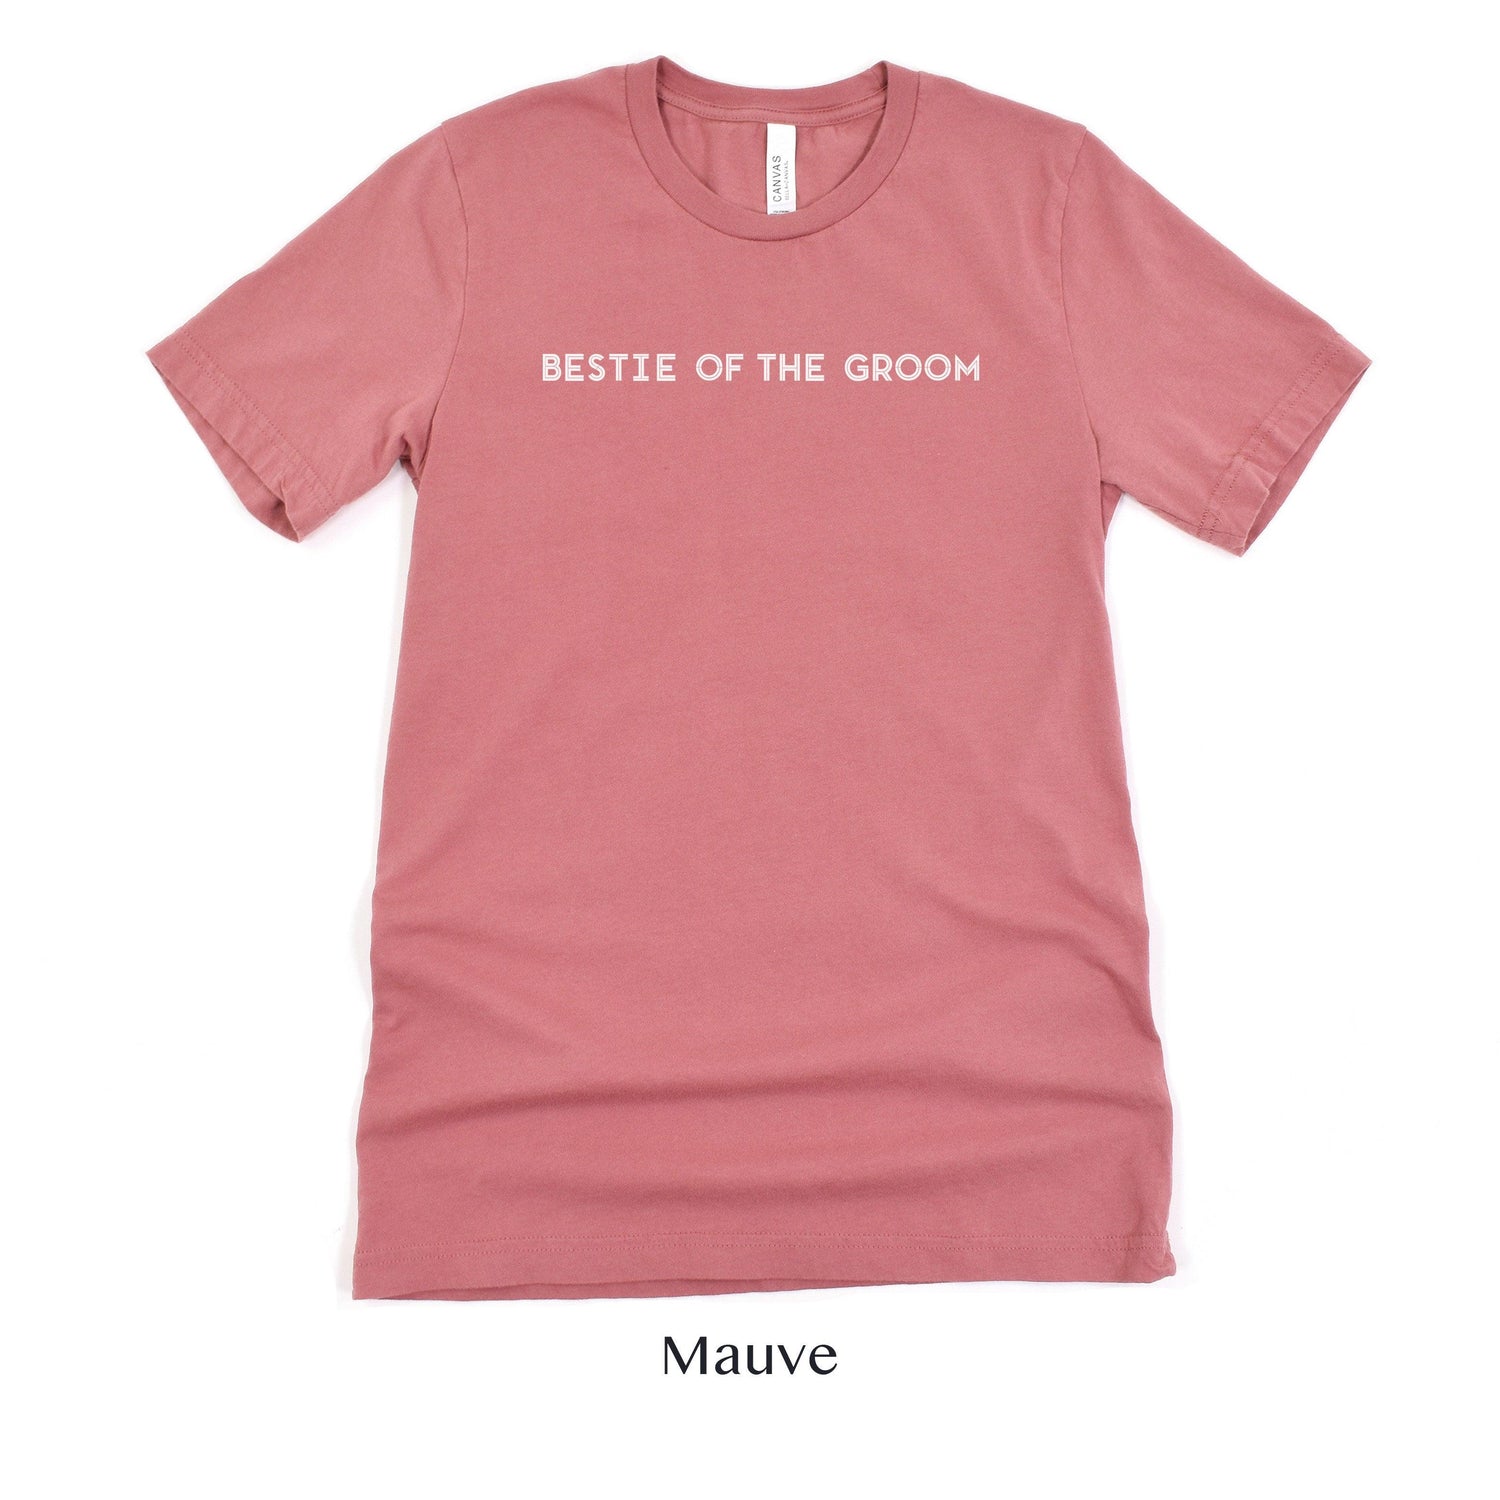 Bestie of the Groom - Unisex t-shirt - Wedding Party Matching Shirts - Bachelor Party by Oaklynn Lane - mauve dusty rose tee